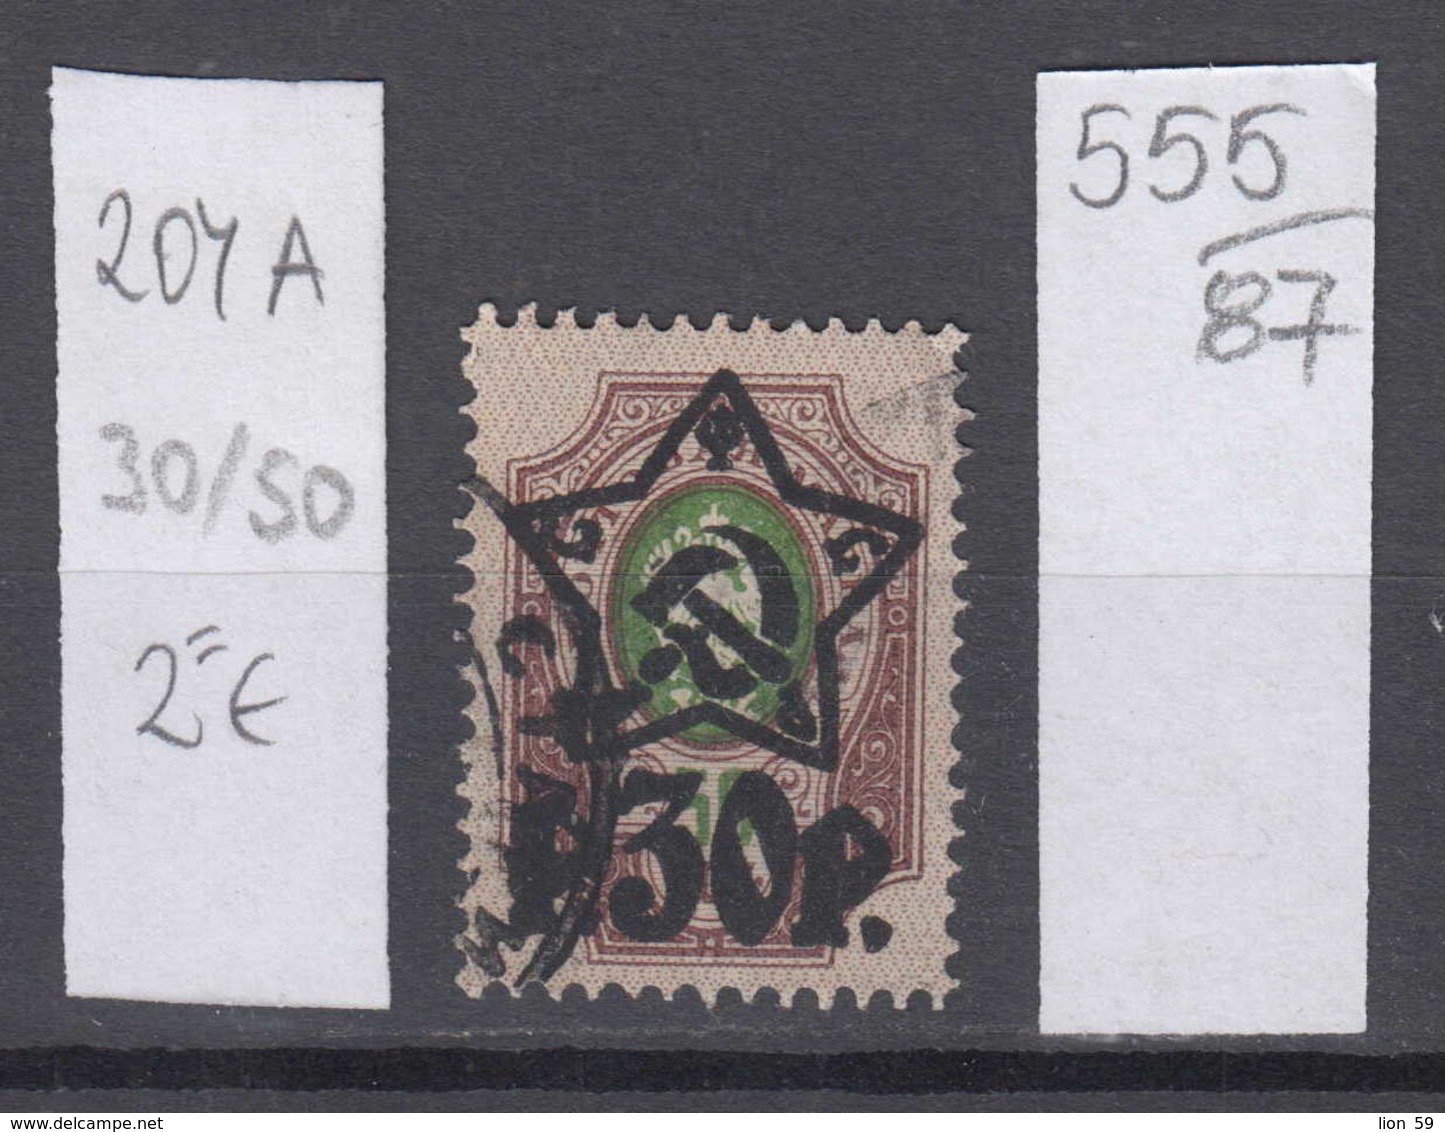 87K555 / 1922 - Michel Nr. 204 A - Overprint 30 R. / 50 K. - Freimarken , Used ( O ) Russia Russie - Used Stamps